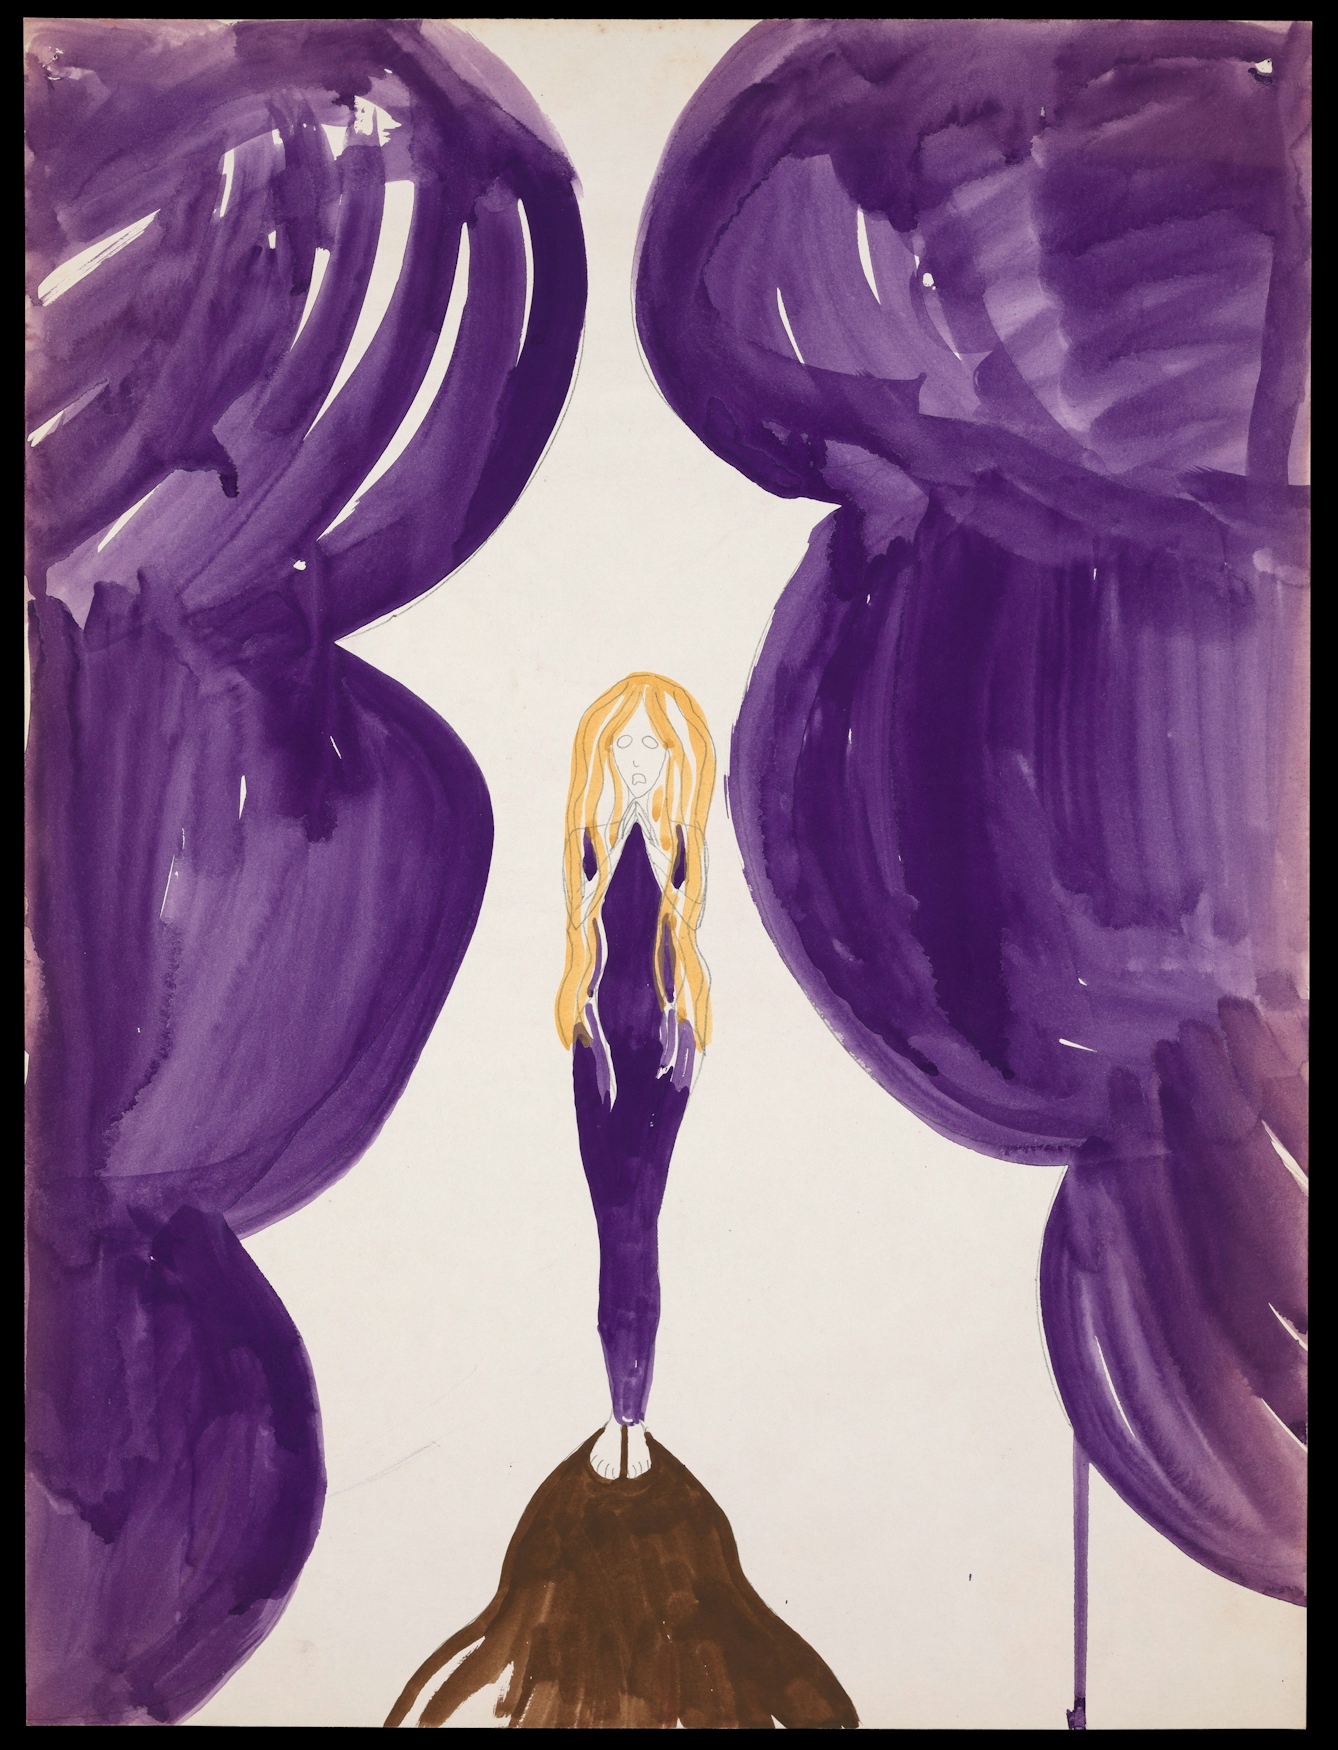 Photograph of a watercolour artwork showing a small female figure with long blond hair and large eyes, wearing a purple all-in-one bodysuit. She is standing on a brown mound-like structure. Her hands are raised to her chin, her mouth open in an expression of fear or worry. To either side of her, large purple cloud-like objects seem to be pushing in on her.